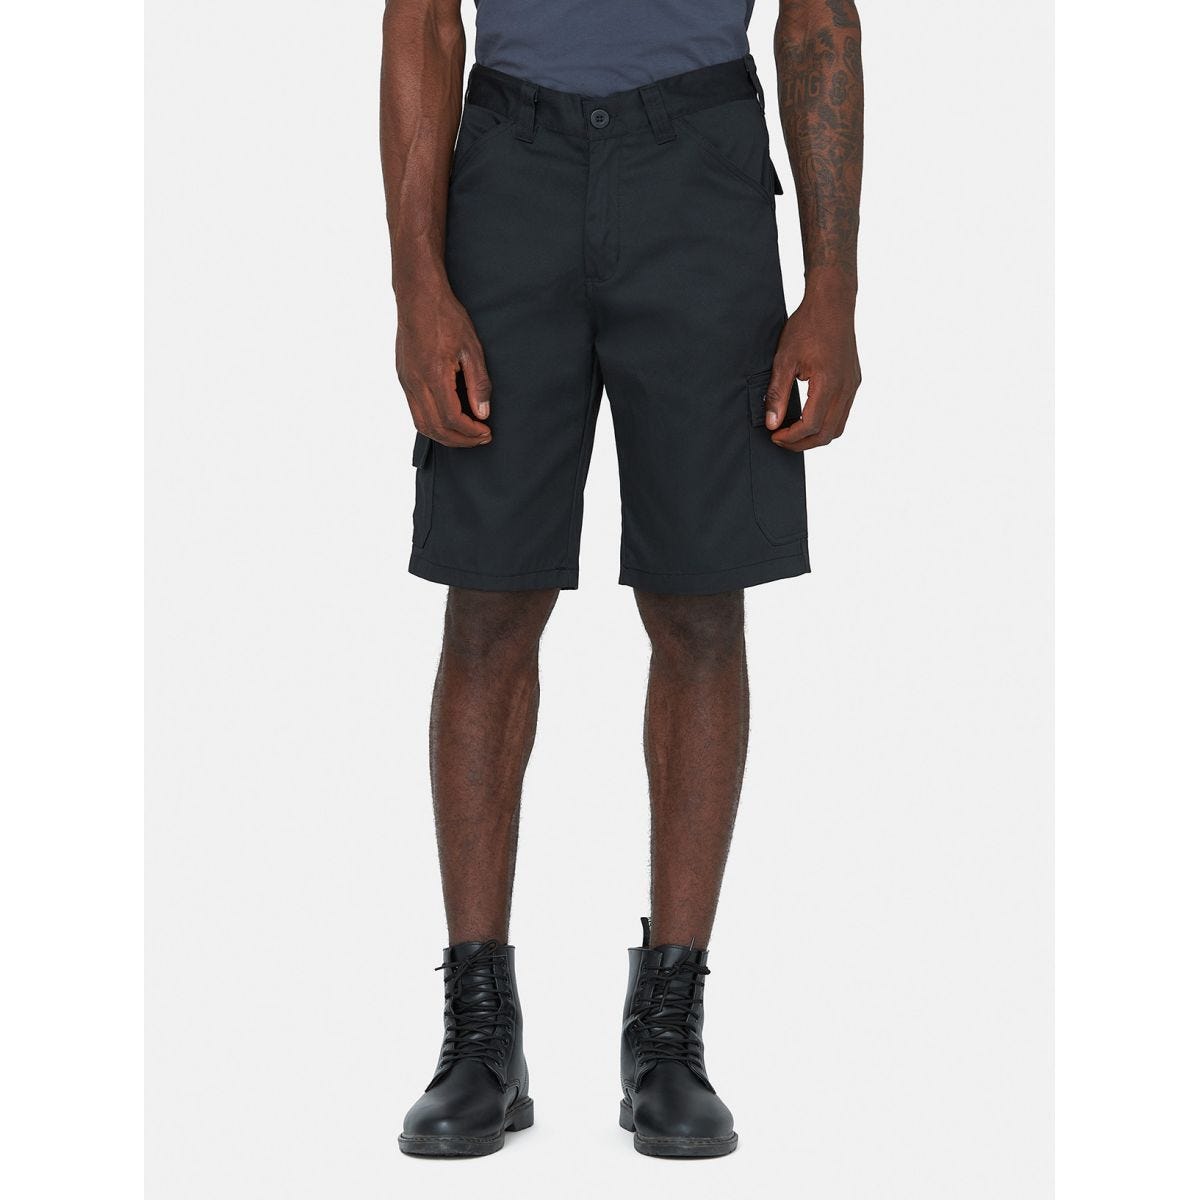 Short Everyday Noir - Dickies - Taille 42 0